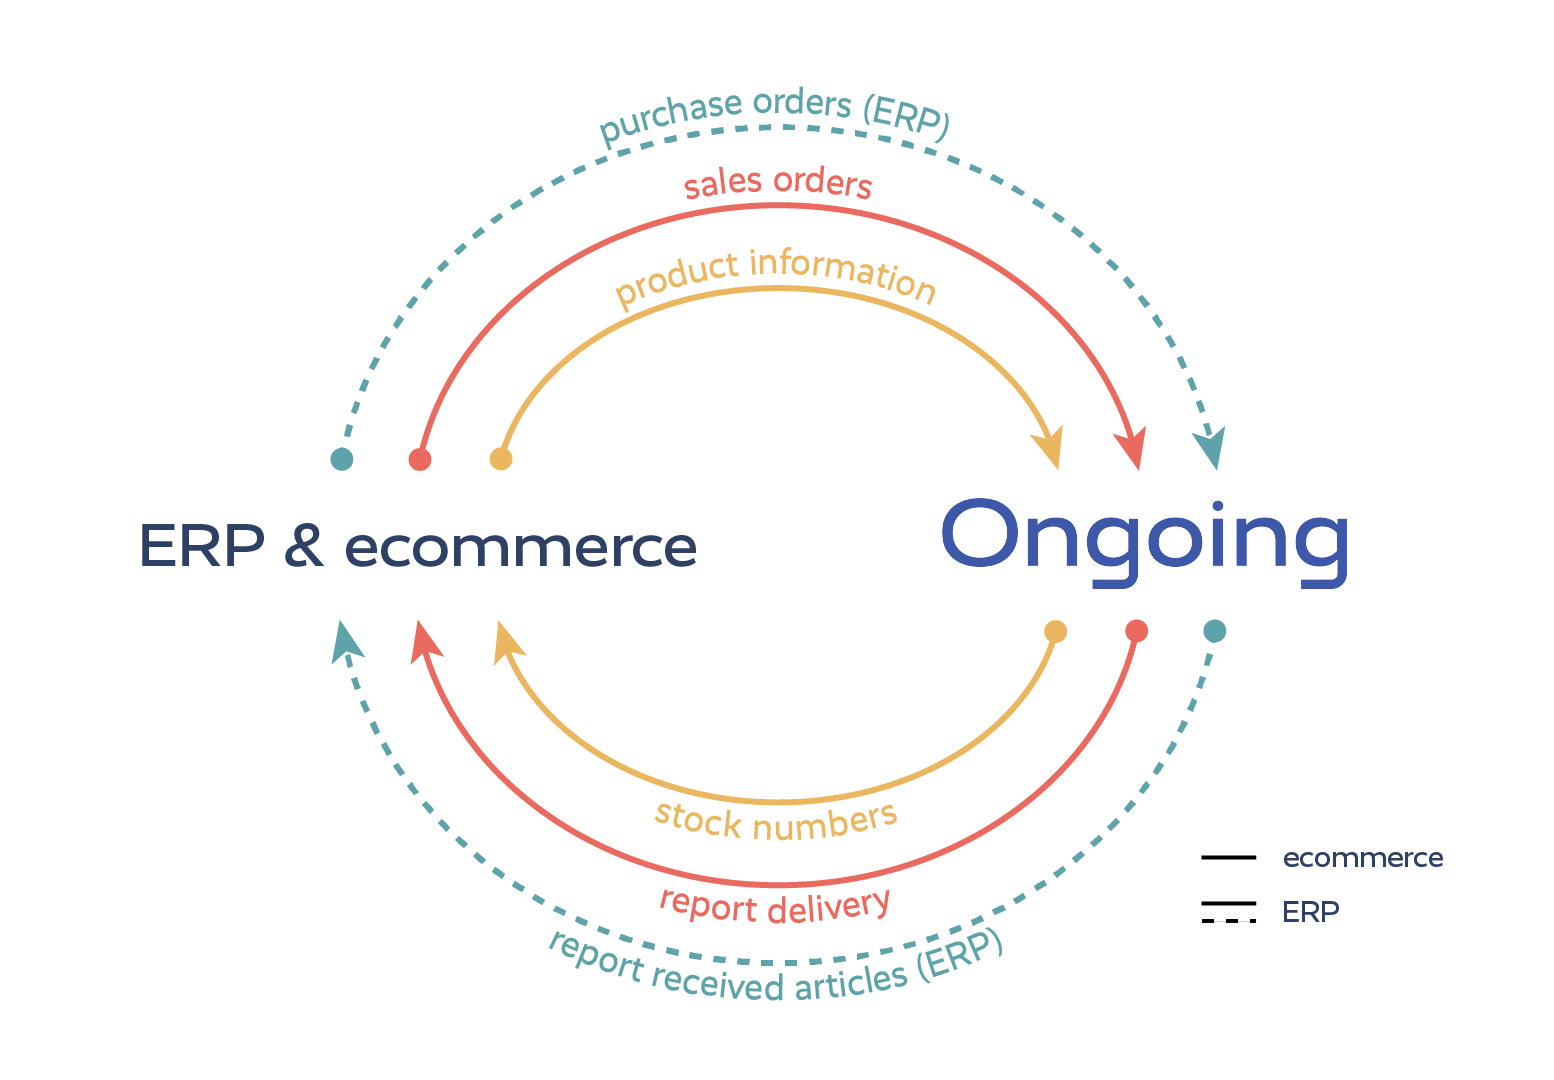 Visualization of the processes in a typical Ongoing WMS ERP or ecommerce integration.